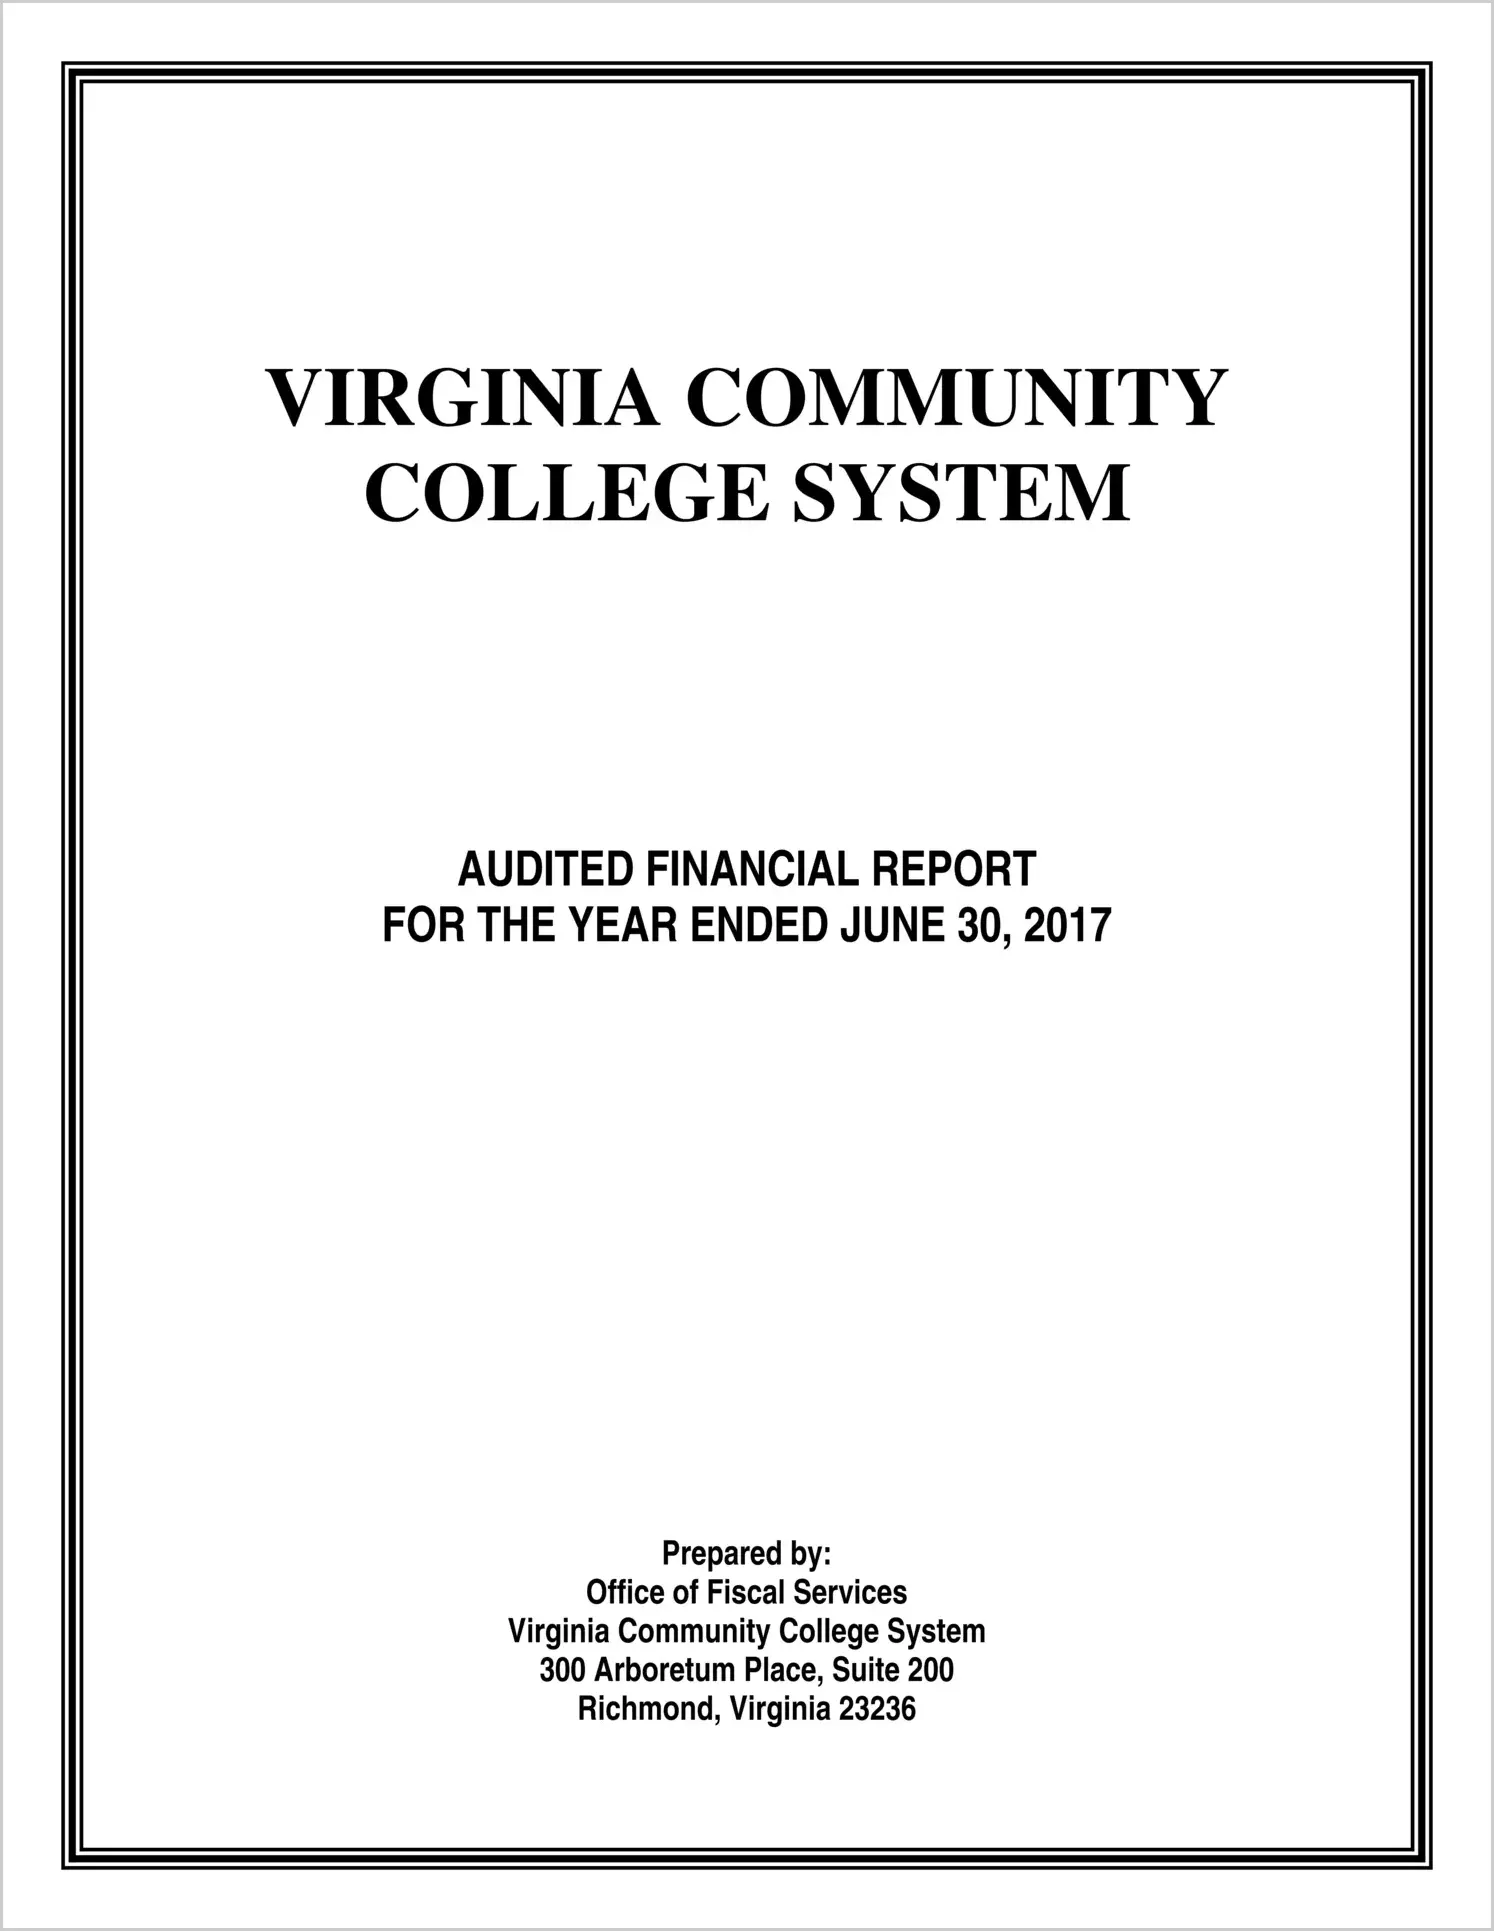 Virginia Community College System Financial Statements for the year ended June 30, 2017